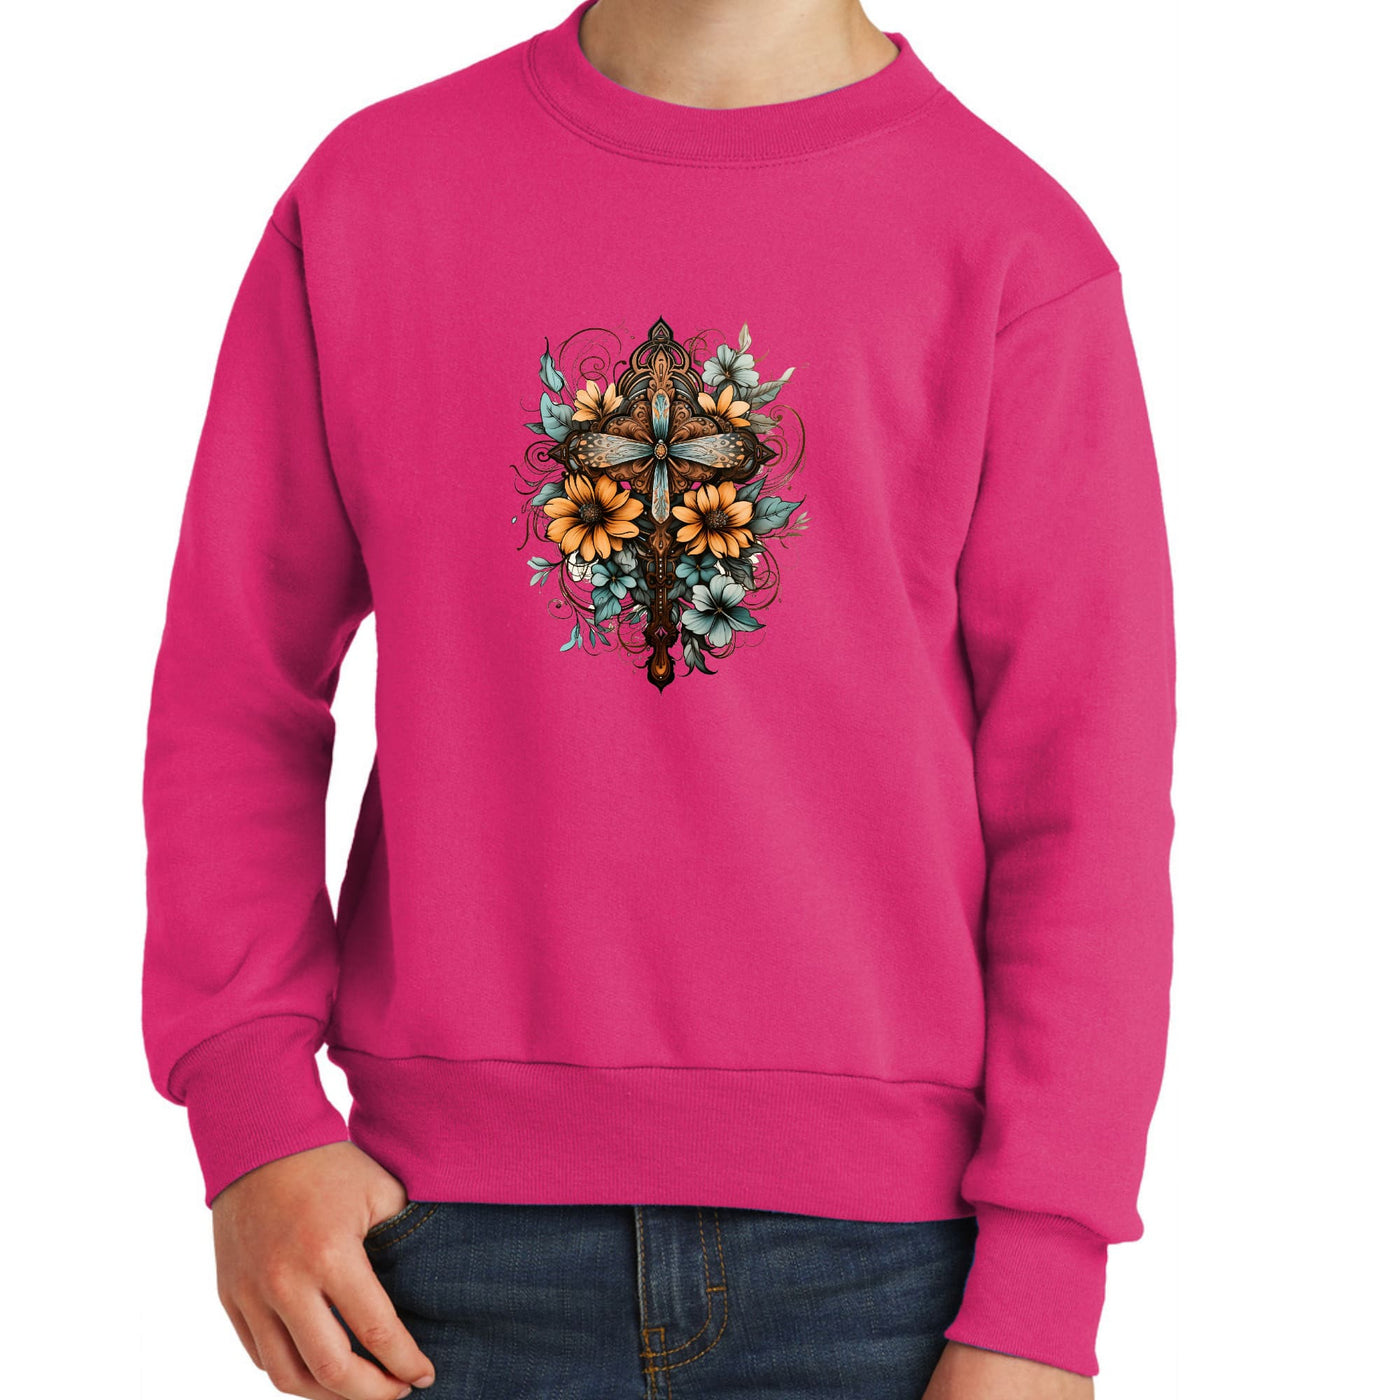 Youth Graphic Sweatshirt Christian Cross Floral Bouquet Brown - Youth